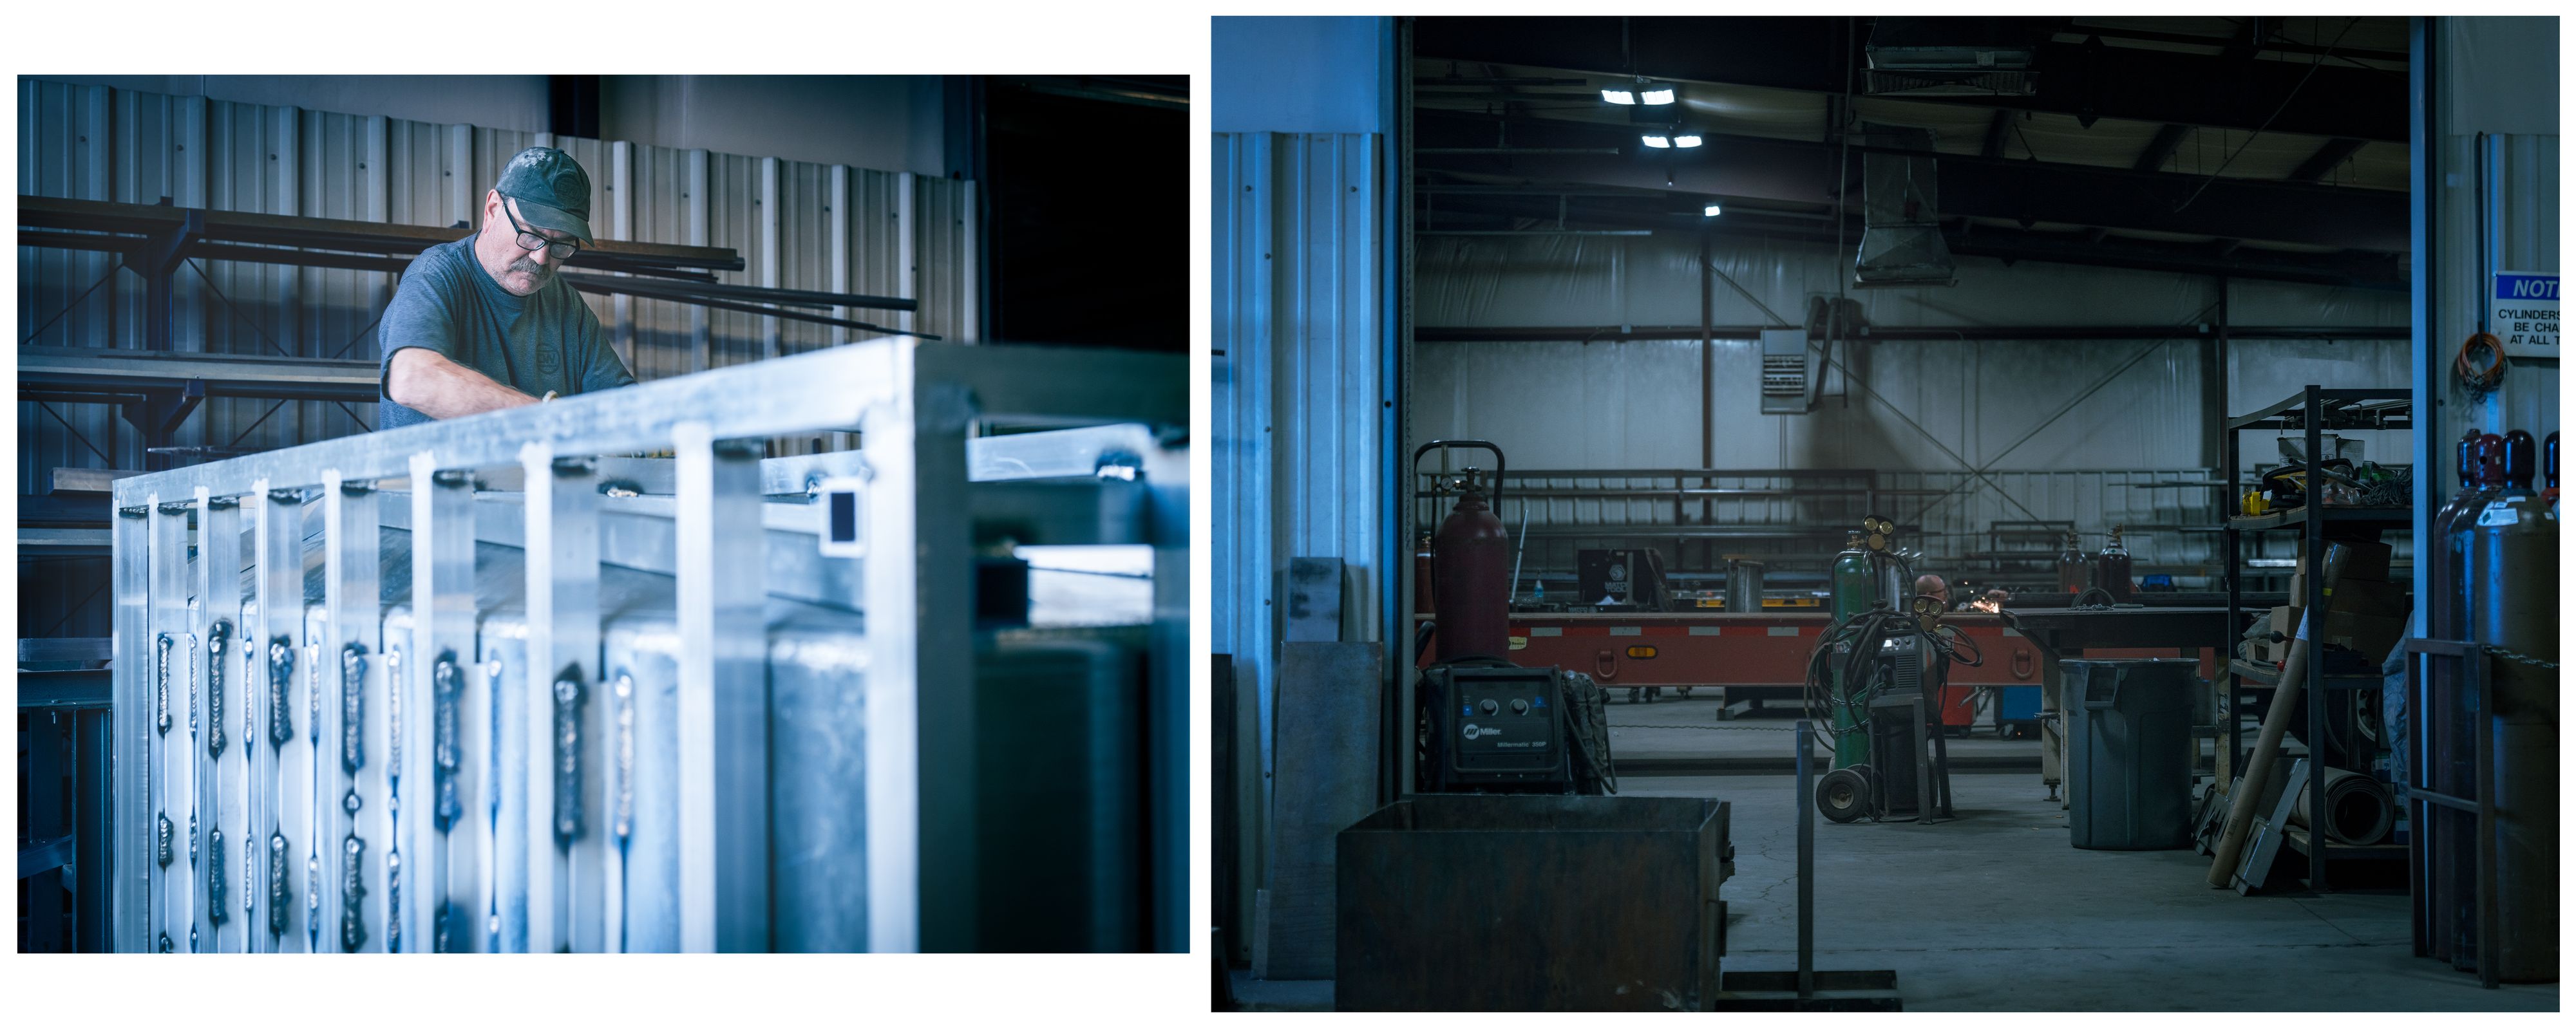 Fabrication / Industrial Photography